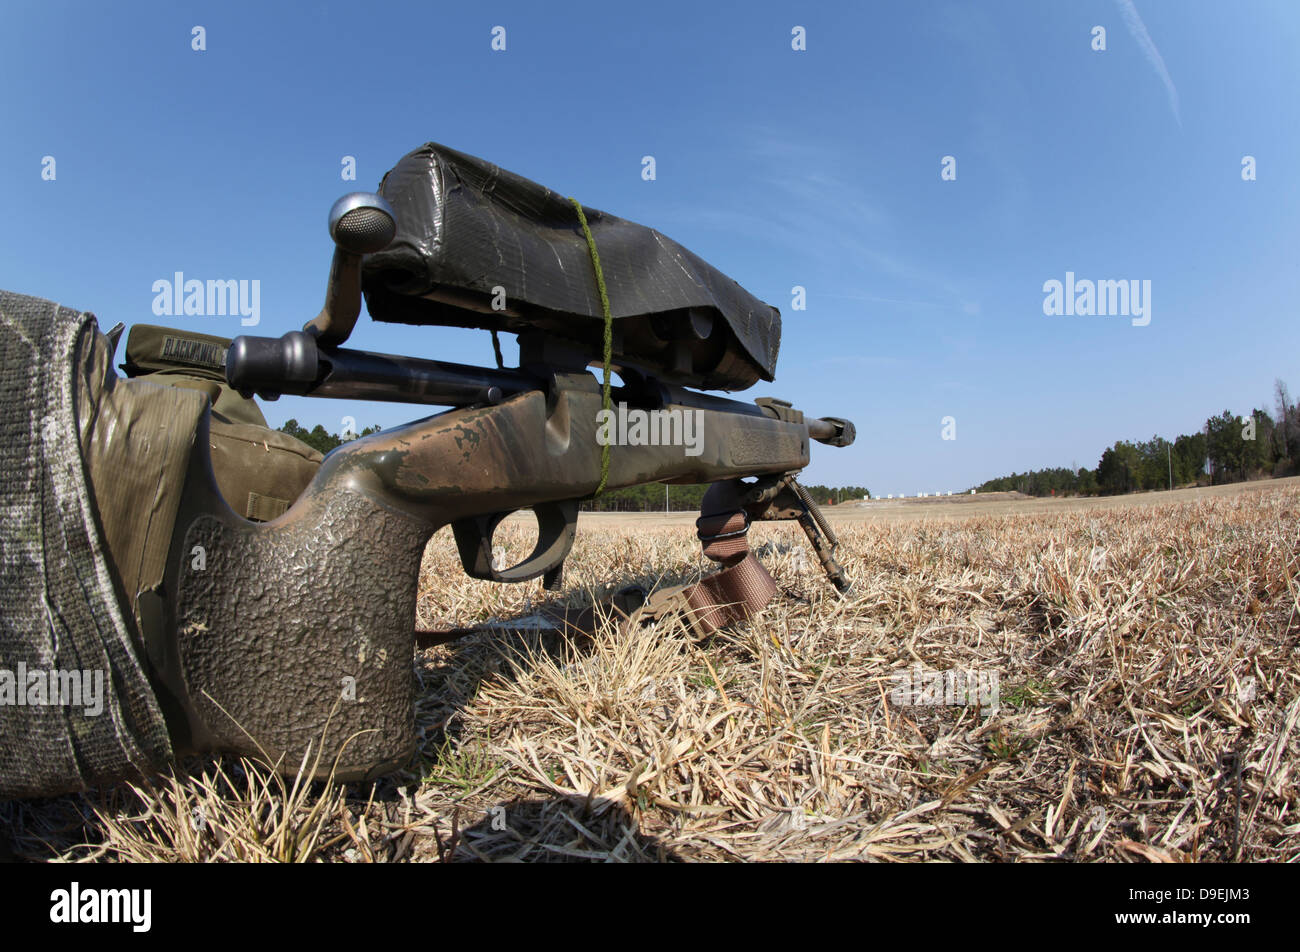 A M40A3 7.62mm sniper rifle sits ready for use on the shooting range. Stock Photo